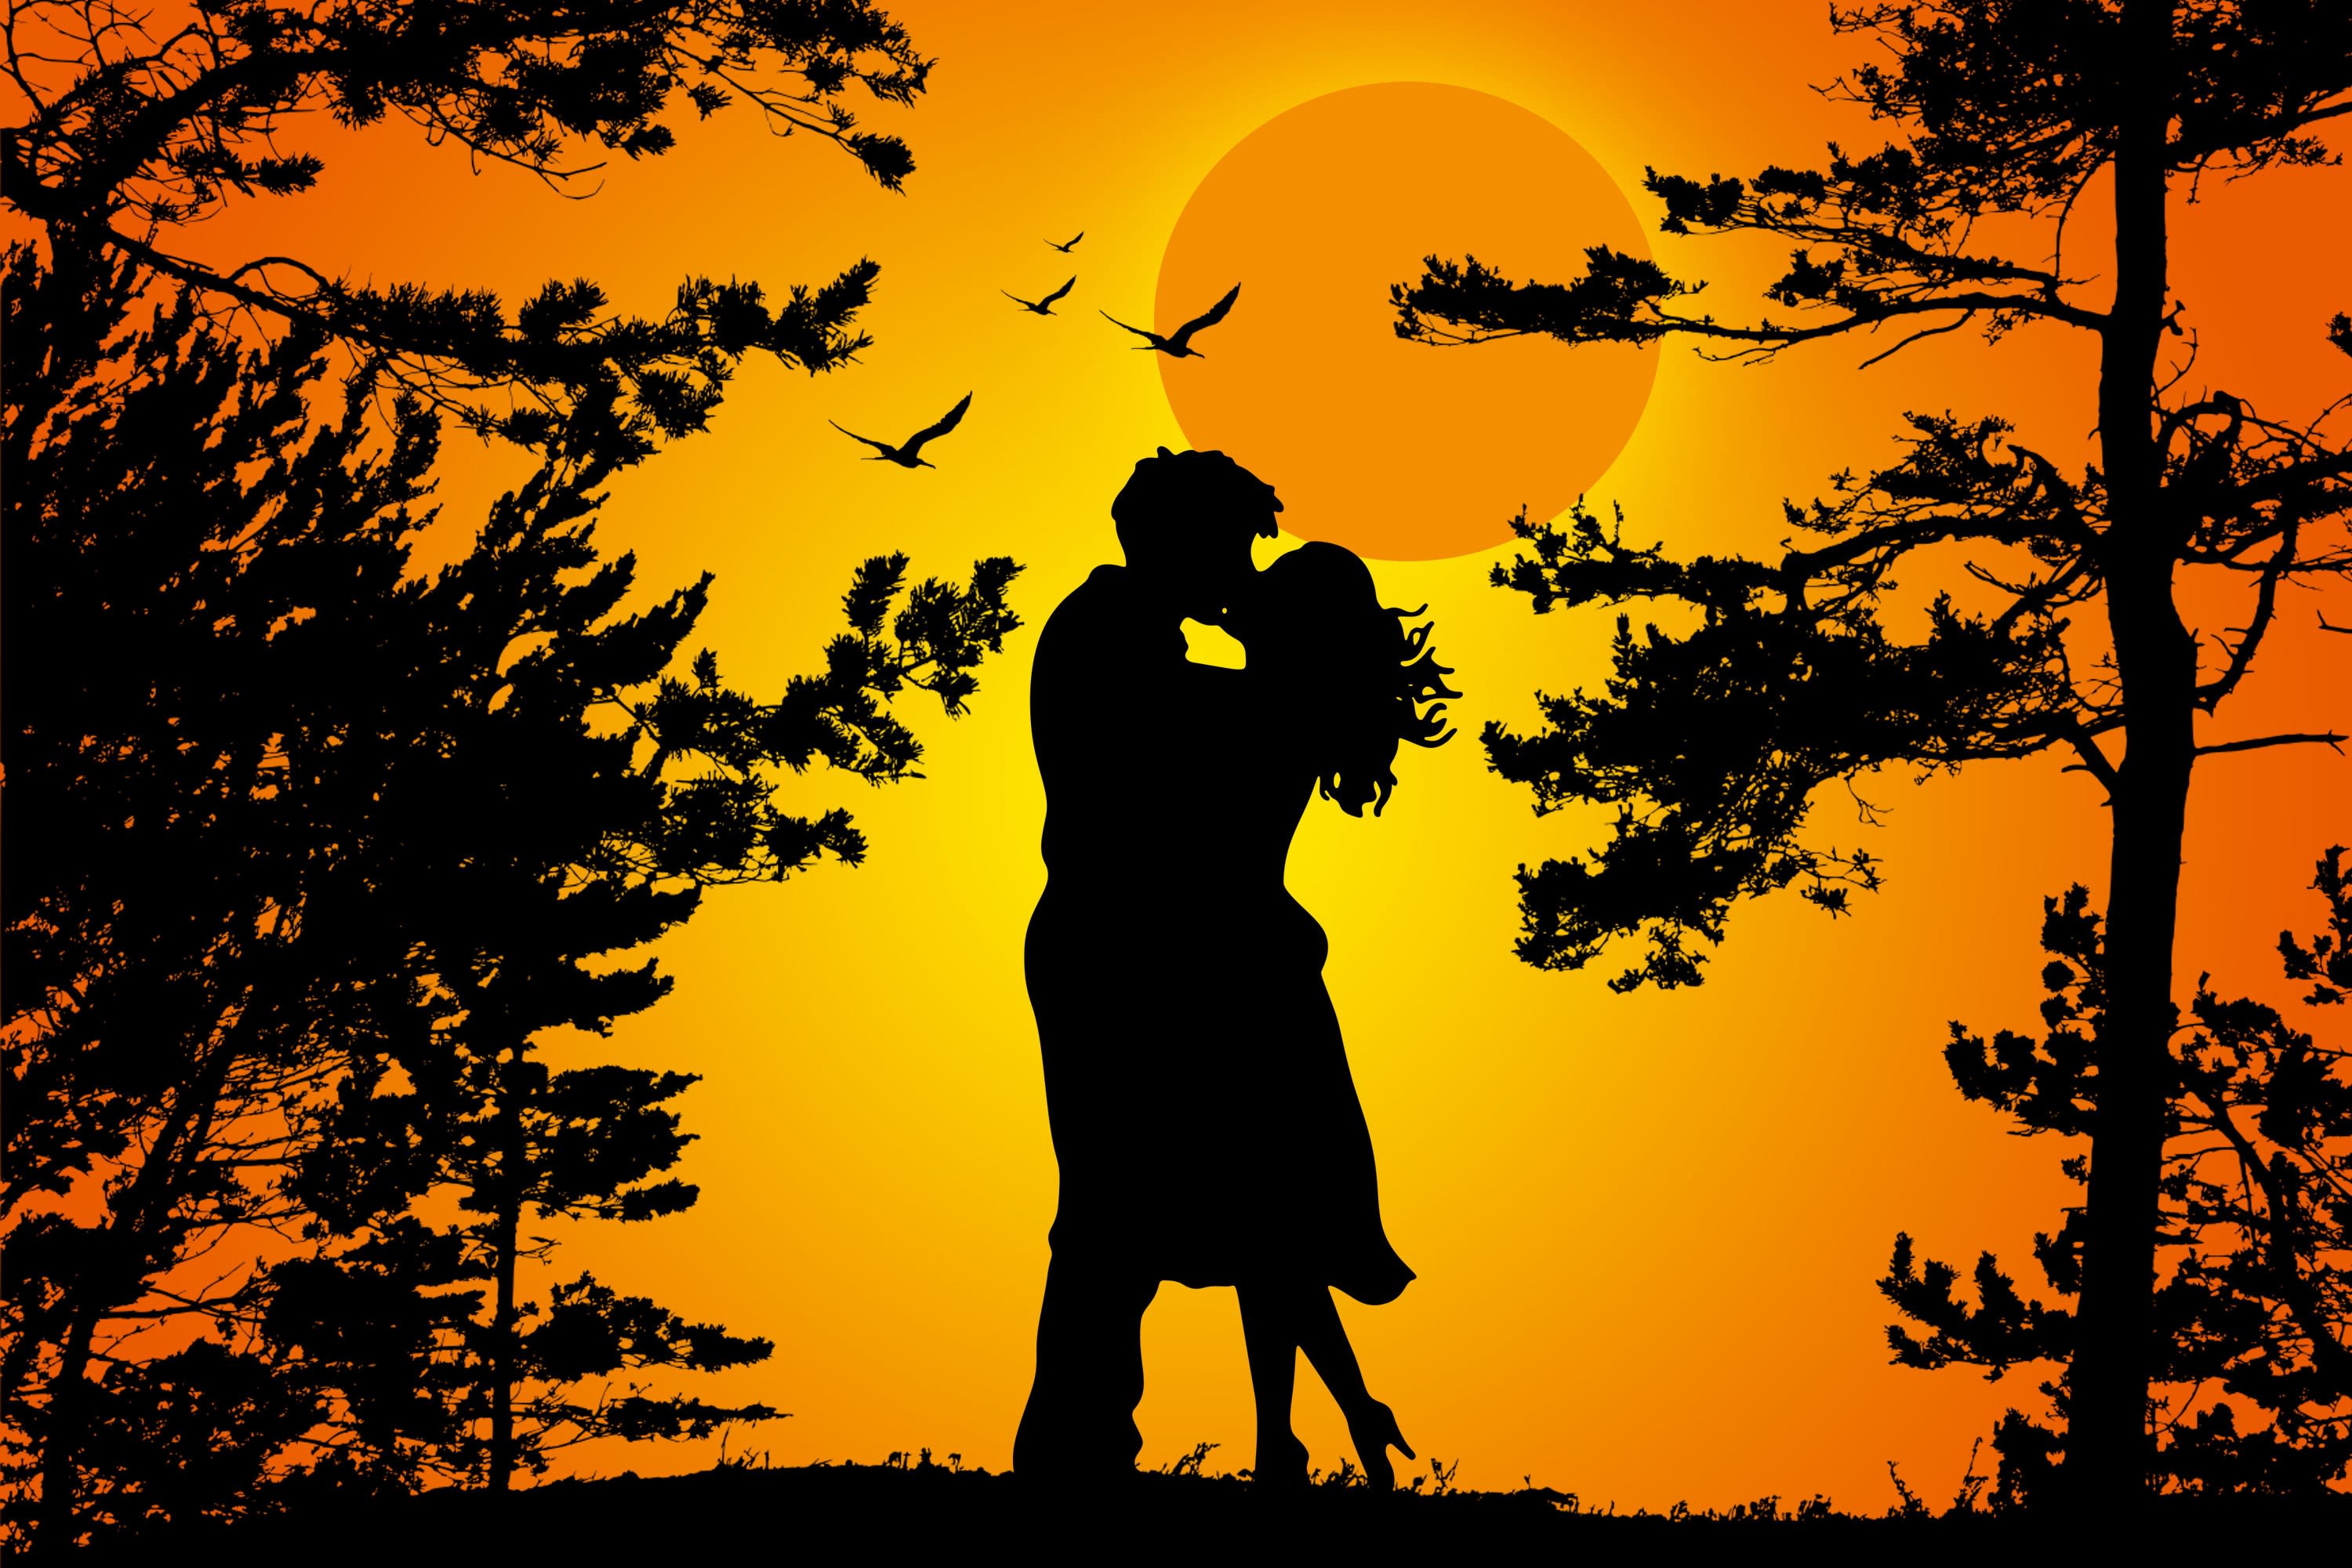 Illustration of lovers at sunset